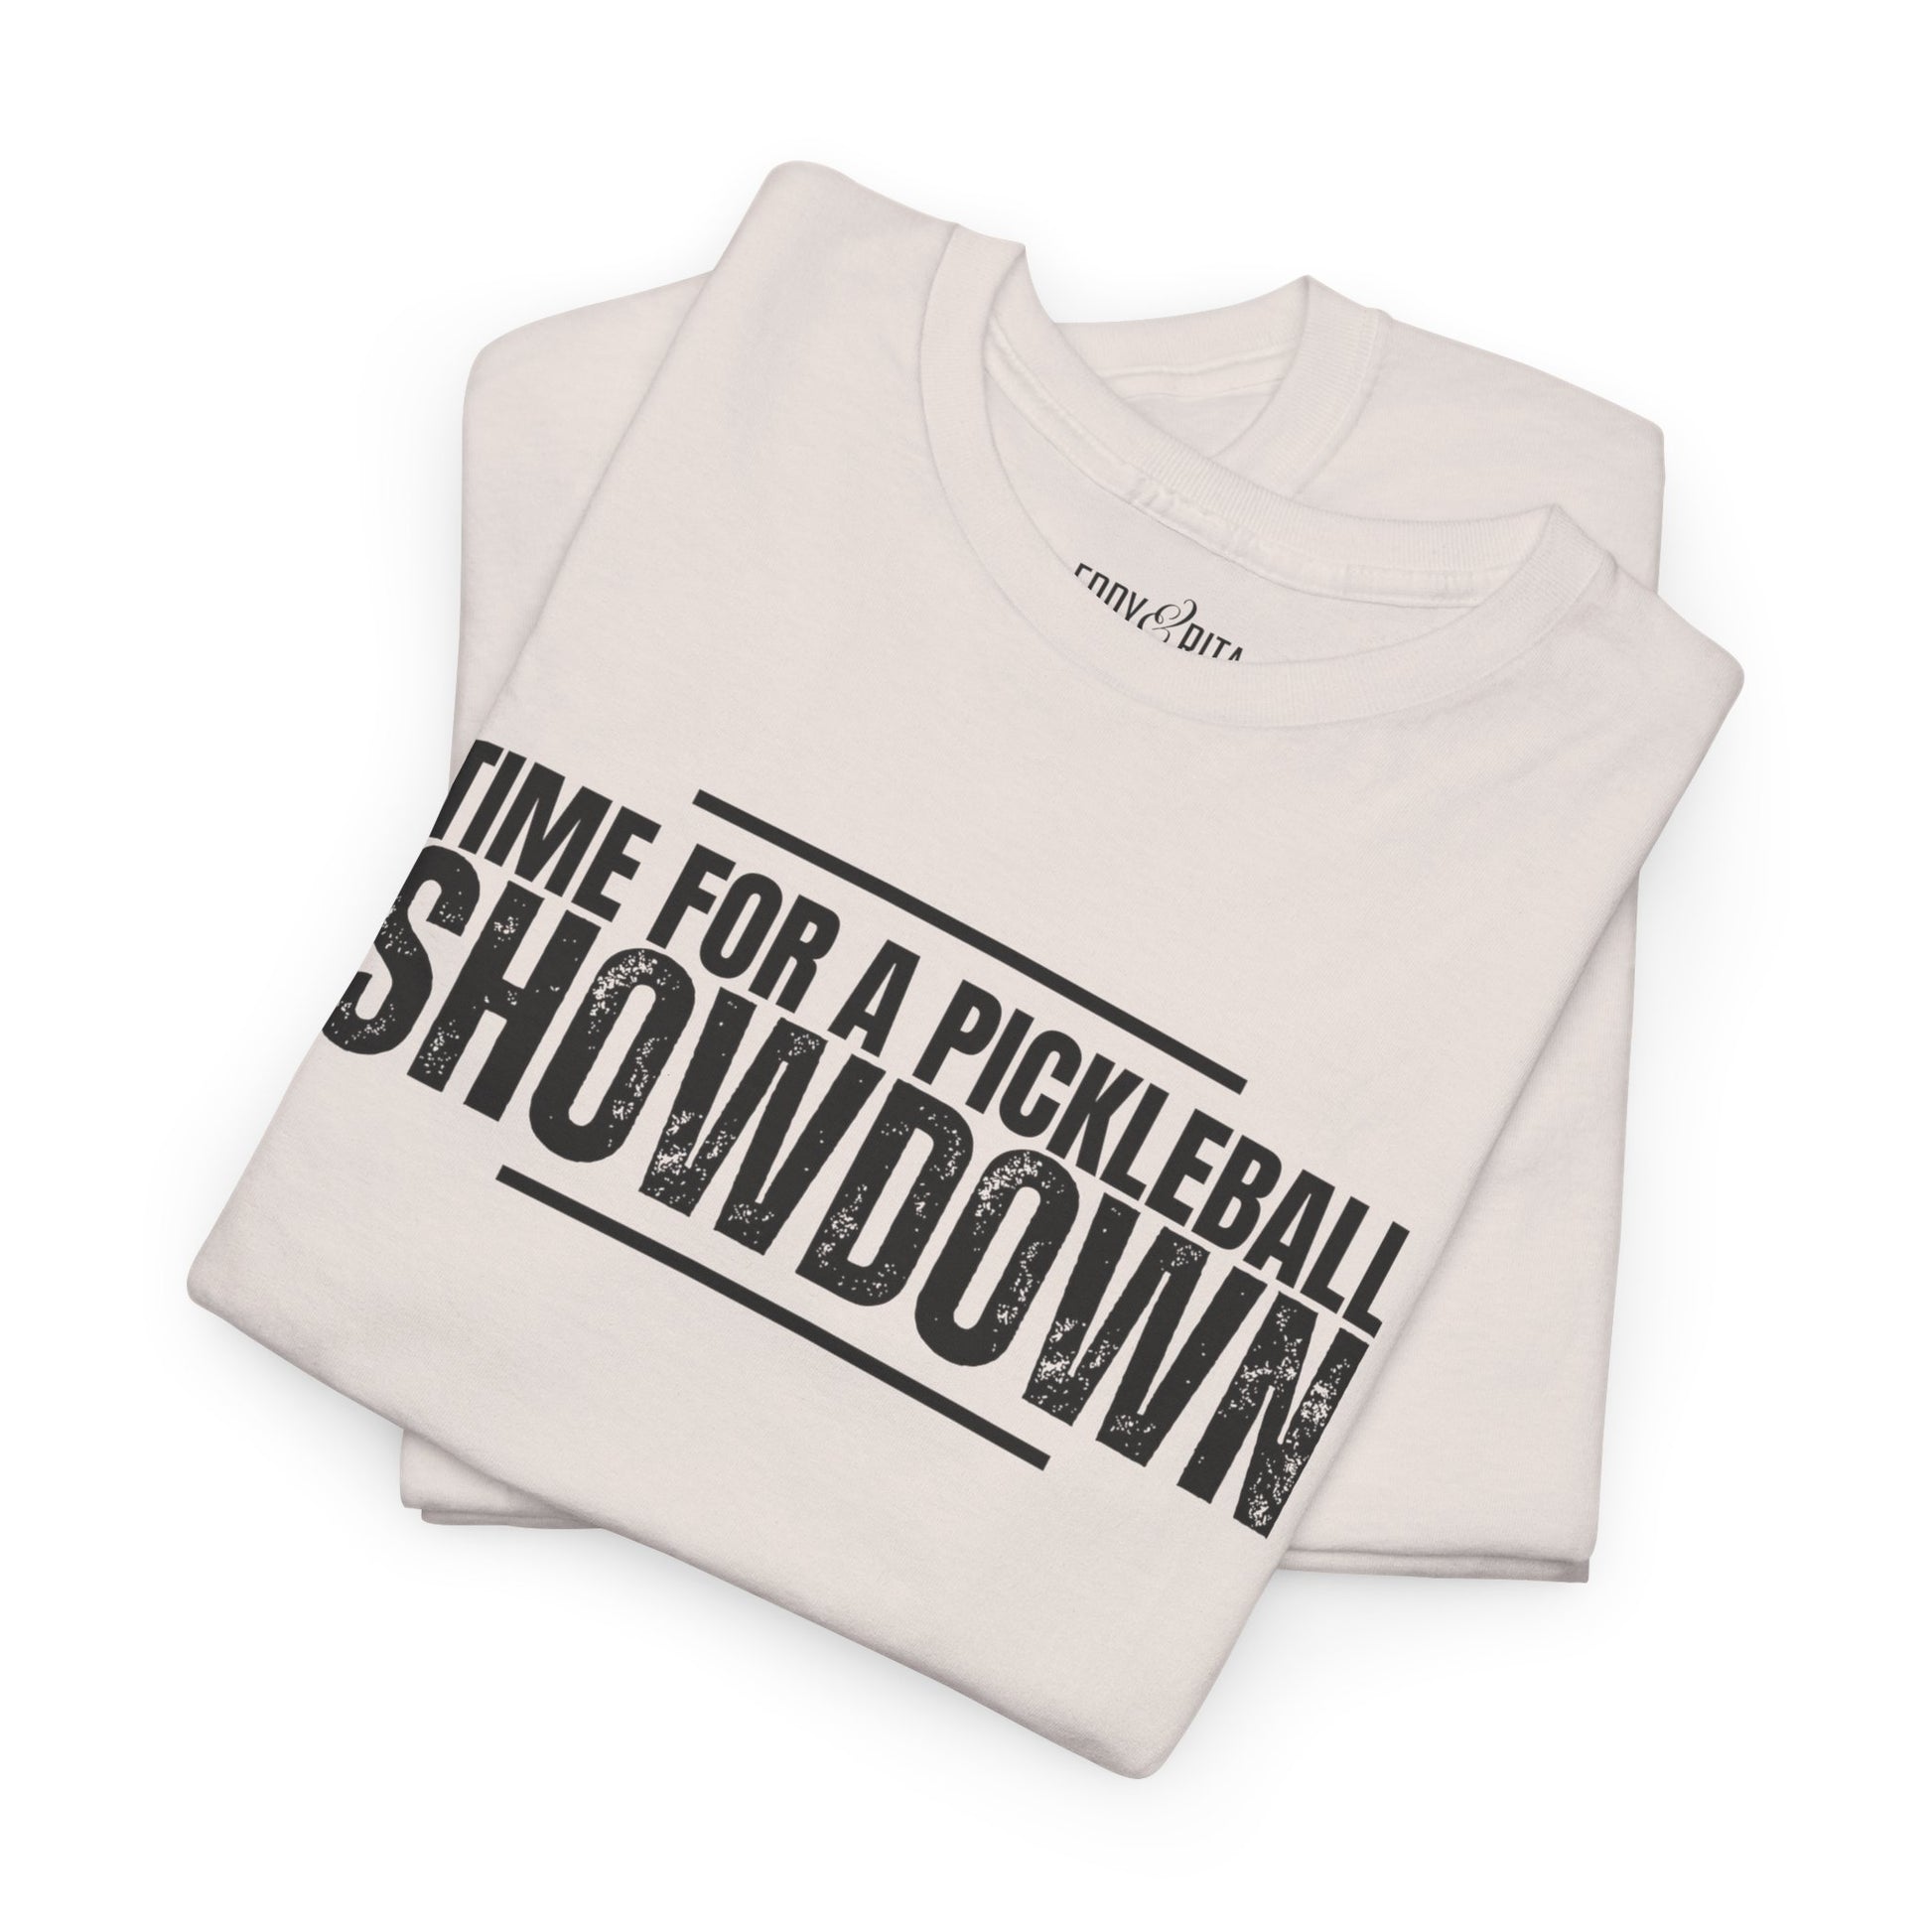 Eddy and Rita Men's Heavy Cotton T-Shirt - "Time for a Pickleball Showdown" Graphic Tee for Pickleball Enthusiasts